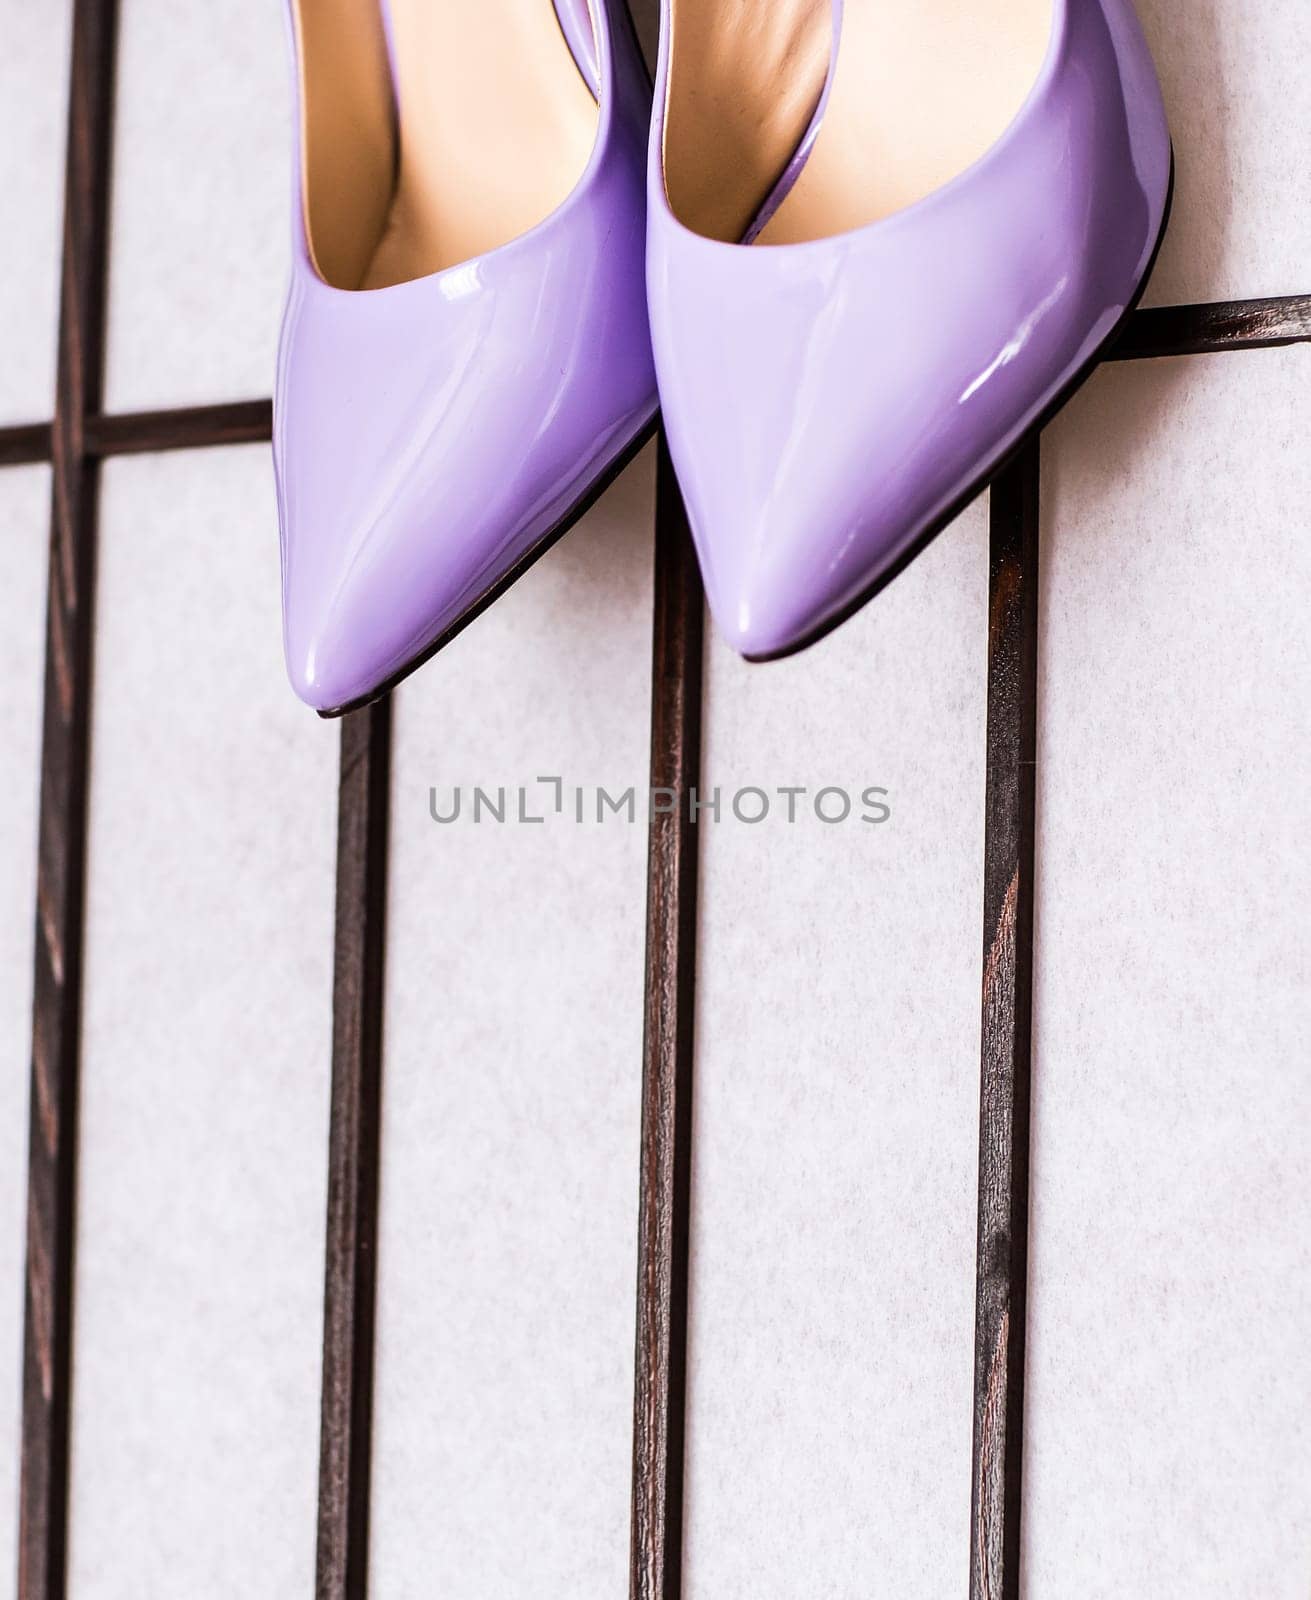 purple shoes on high heels by Satura86